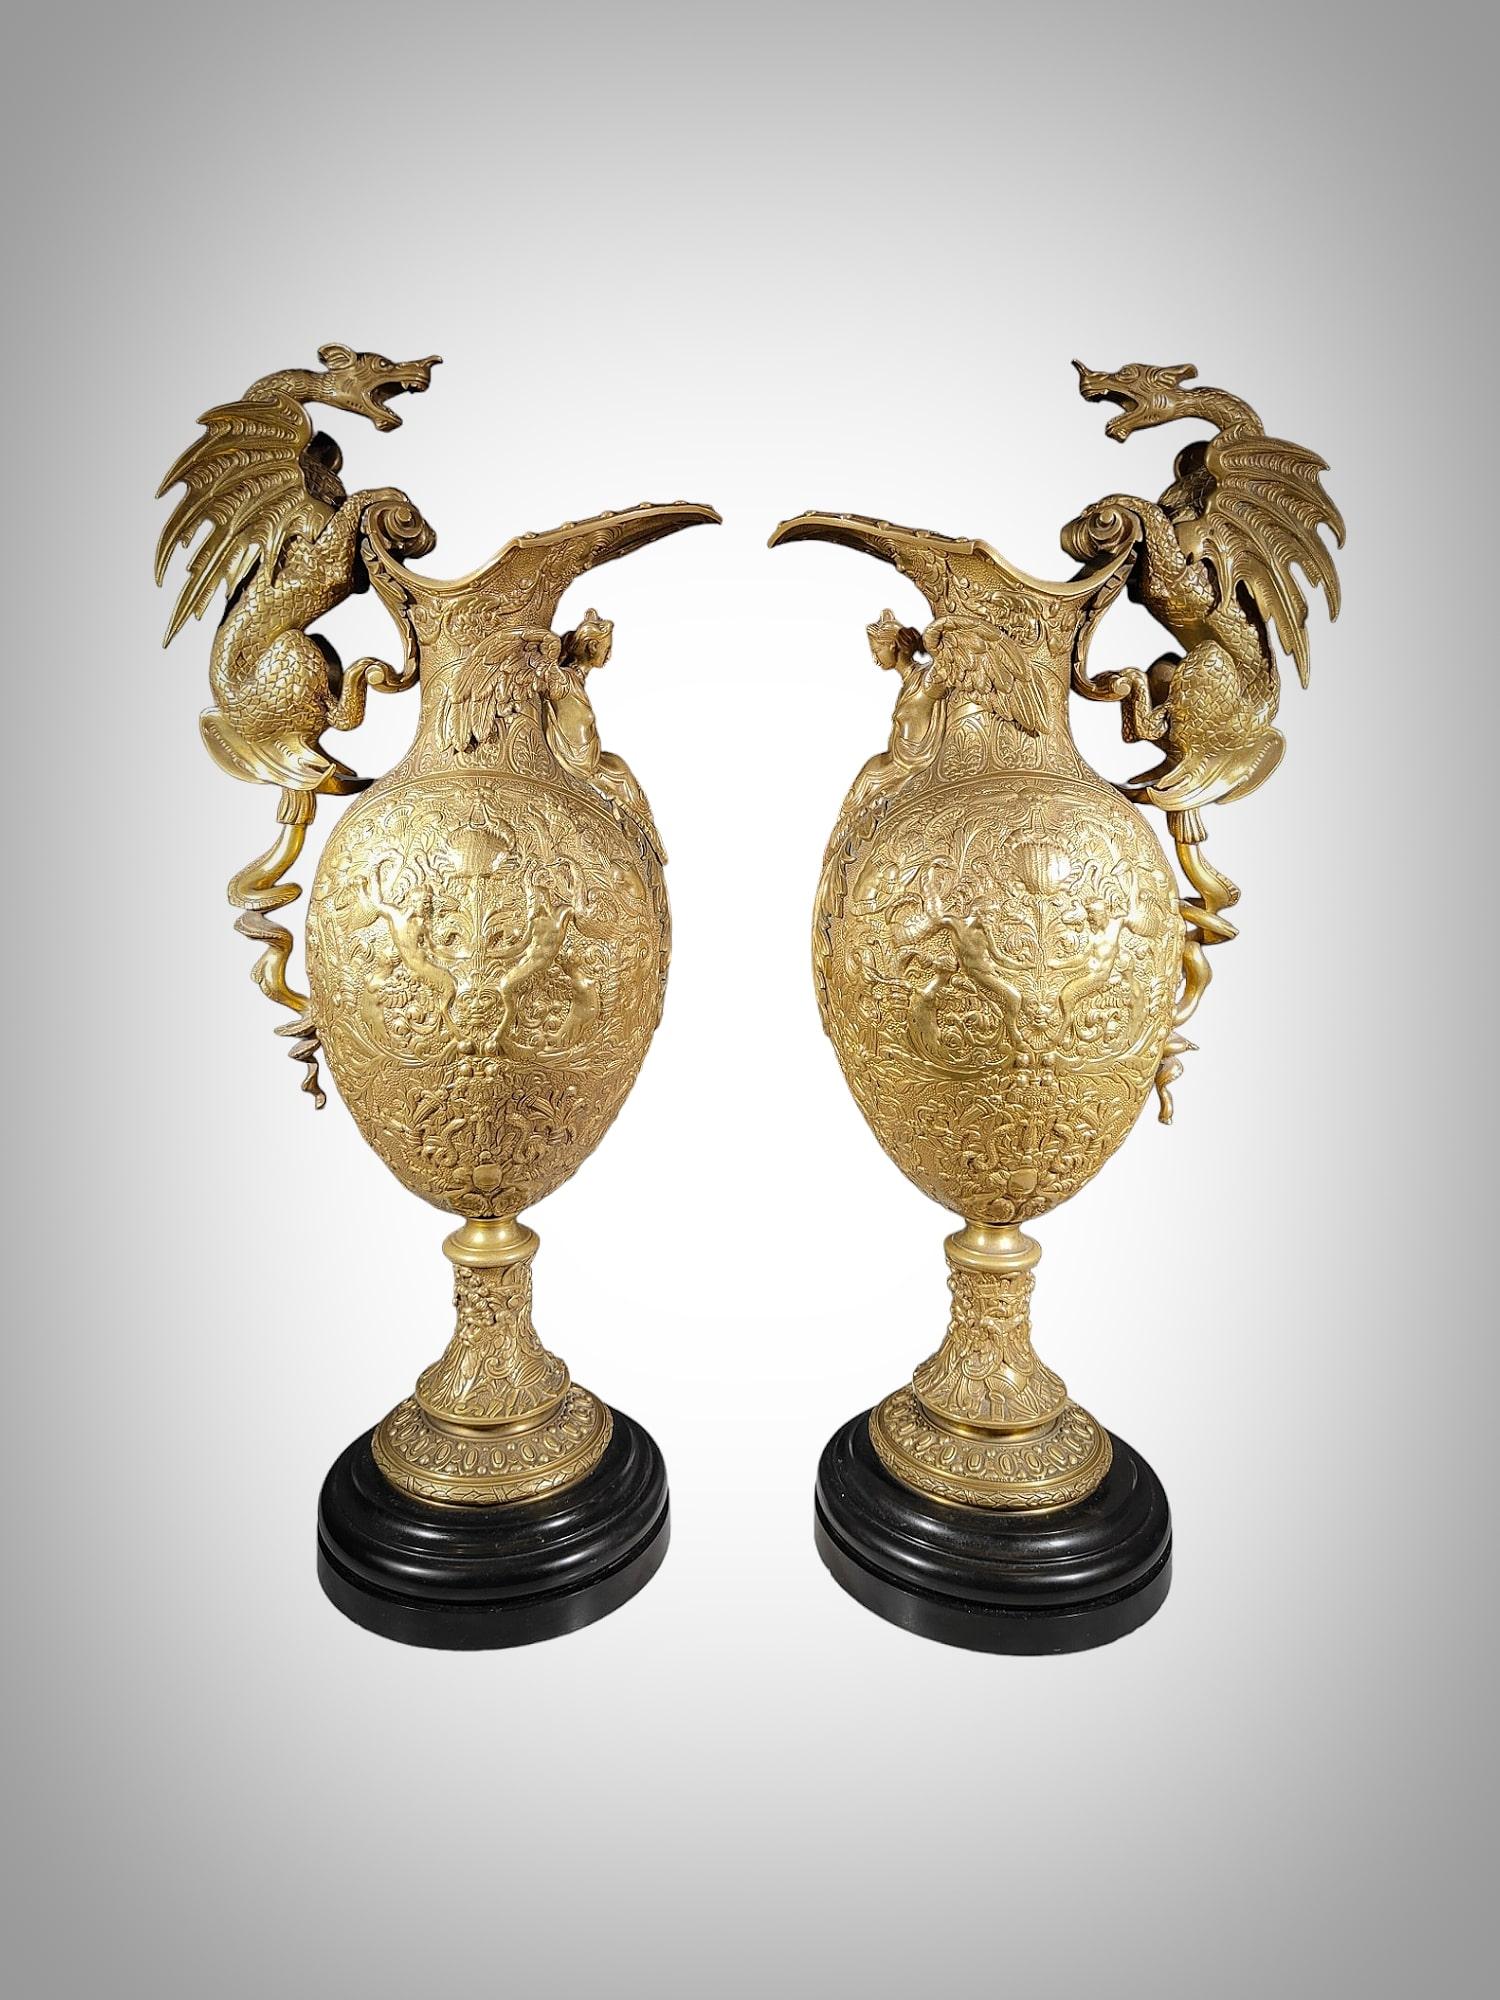 Enhance your living space with this exquisite pair of grand bronze vases, showcasing the impeccable craftsmanship of the 19th century. These impressive vases feature intricate relief chiseling with Renaissance motifs, and their dragon-shaped handles